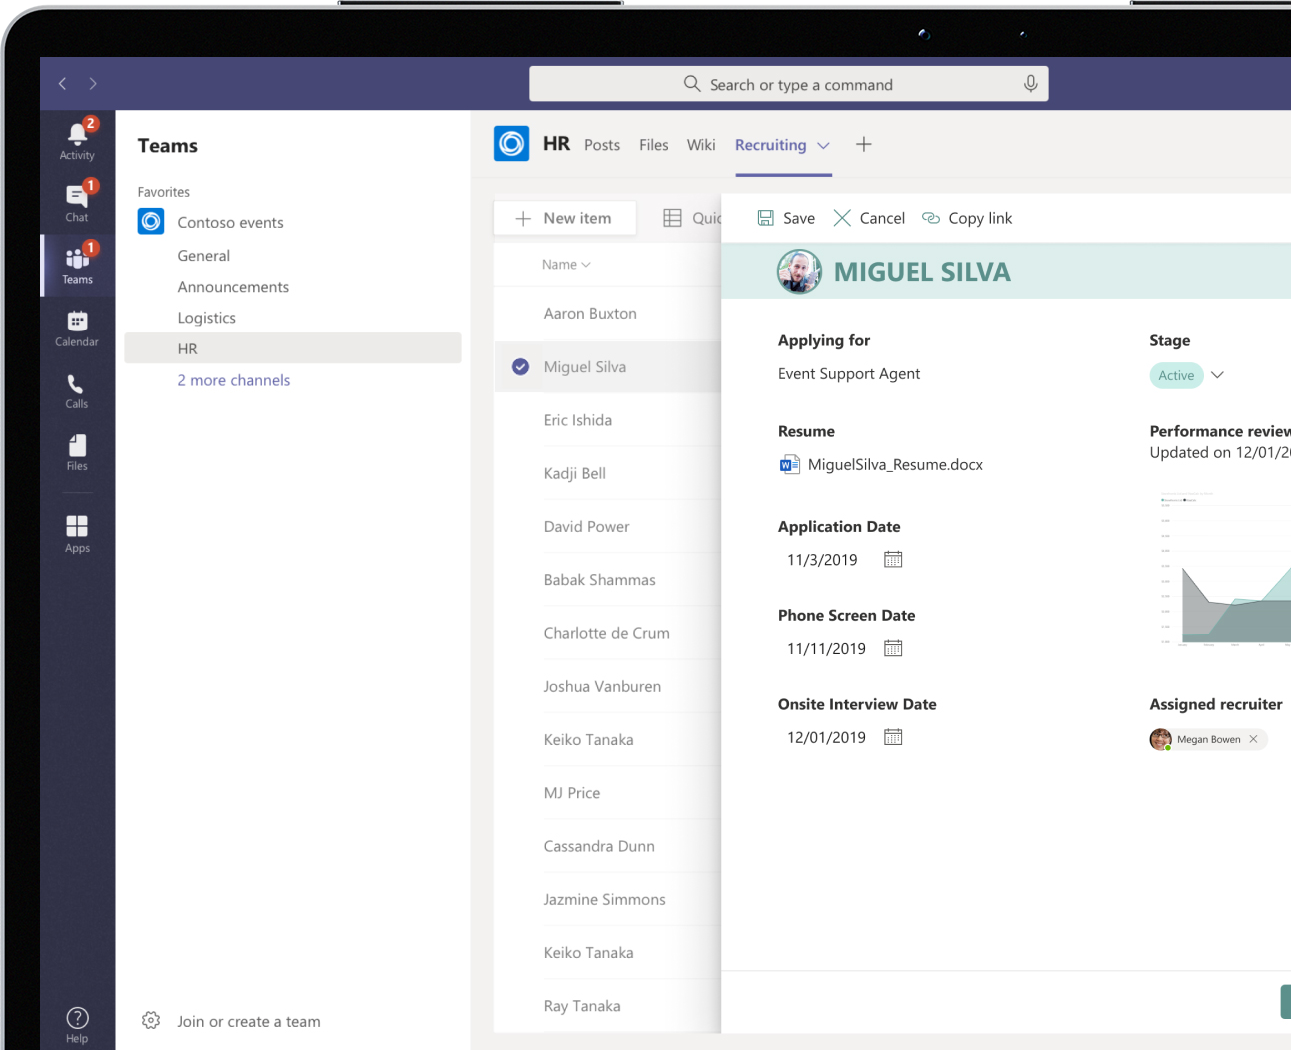 An applicant’s information shown on an HR recruiting list within Microsoft Teams